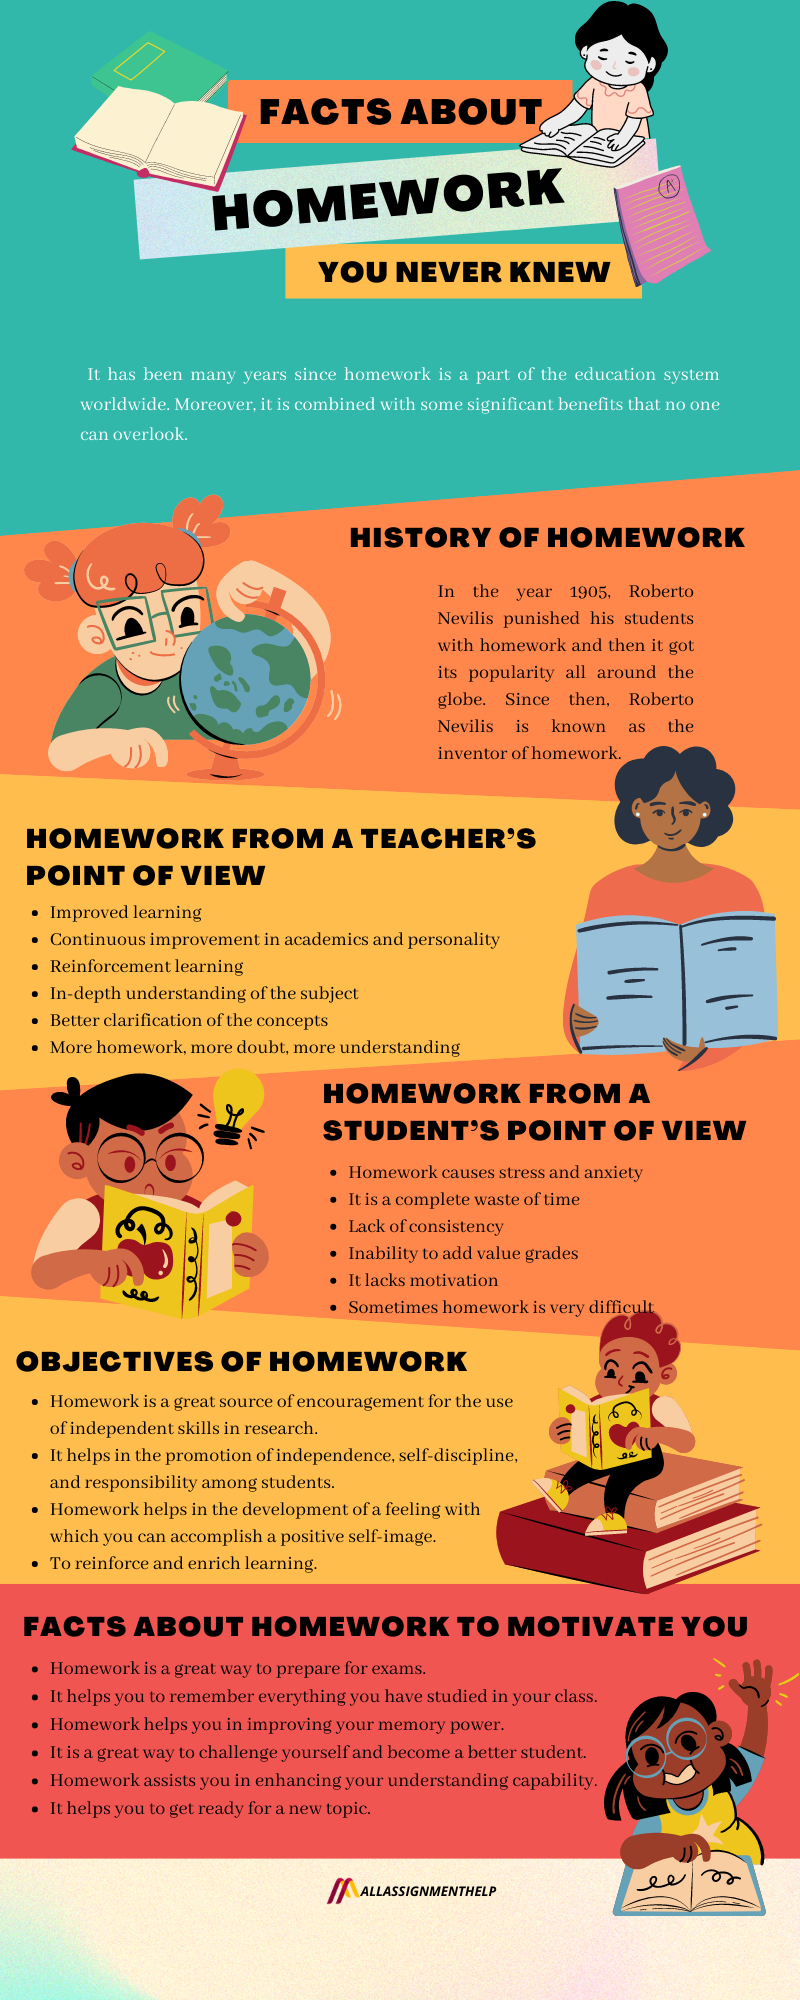 Facts About Homework 